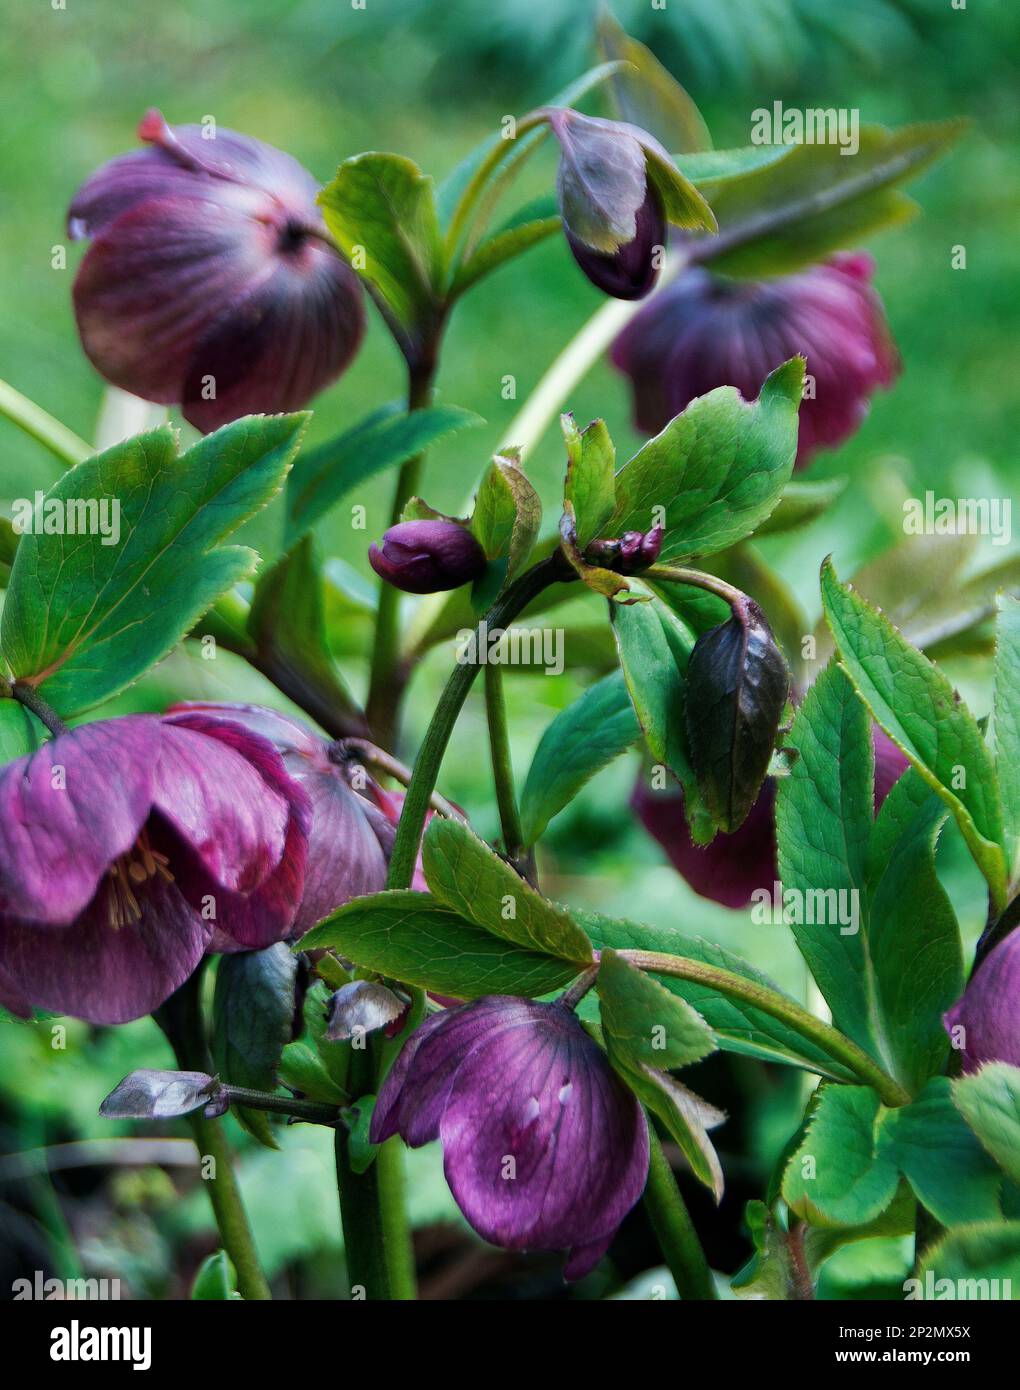 Flowers of Helleborus x hybridus opening  in dark shades of magenta with deep purple striations but hanging their heads Stock Photo